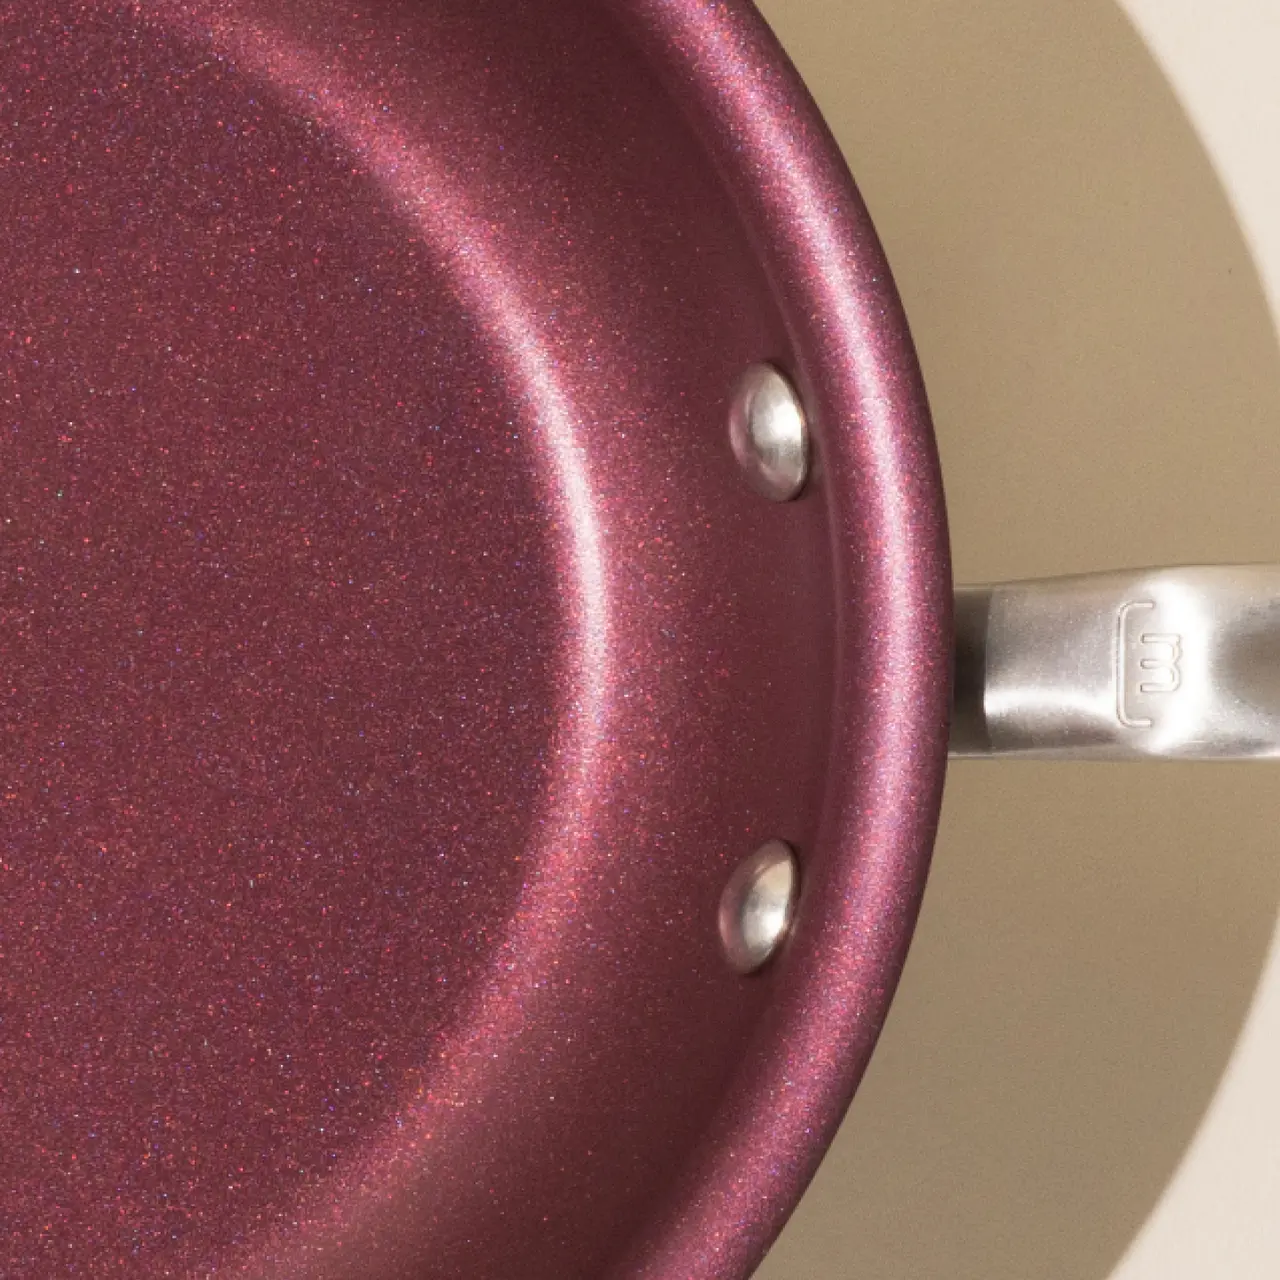 A close-up view of a burgundy non-stick frying pan with a metallic handle attached by two rivets.